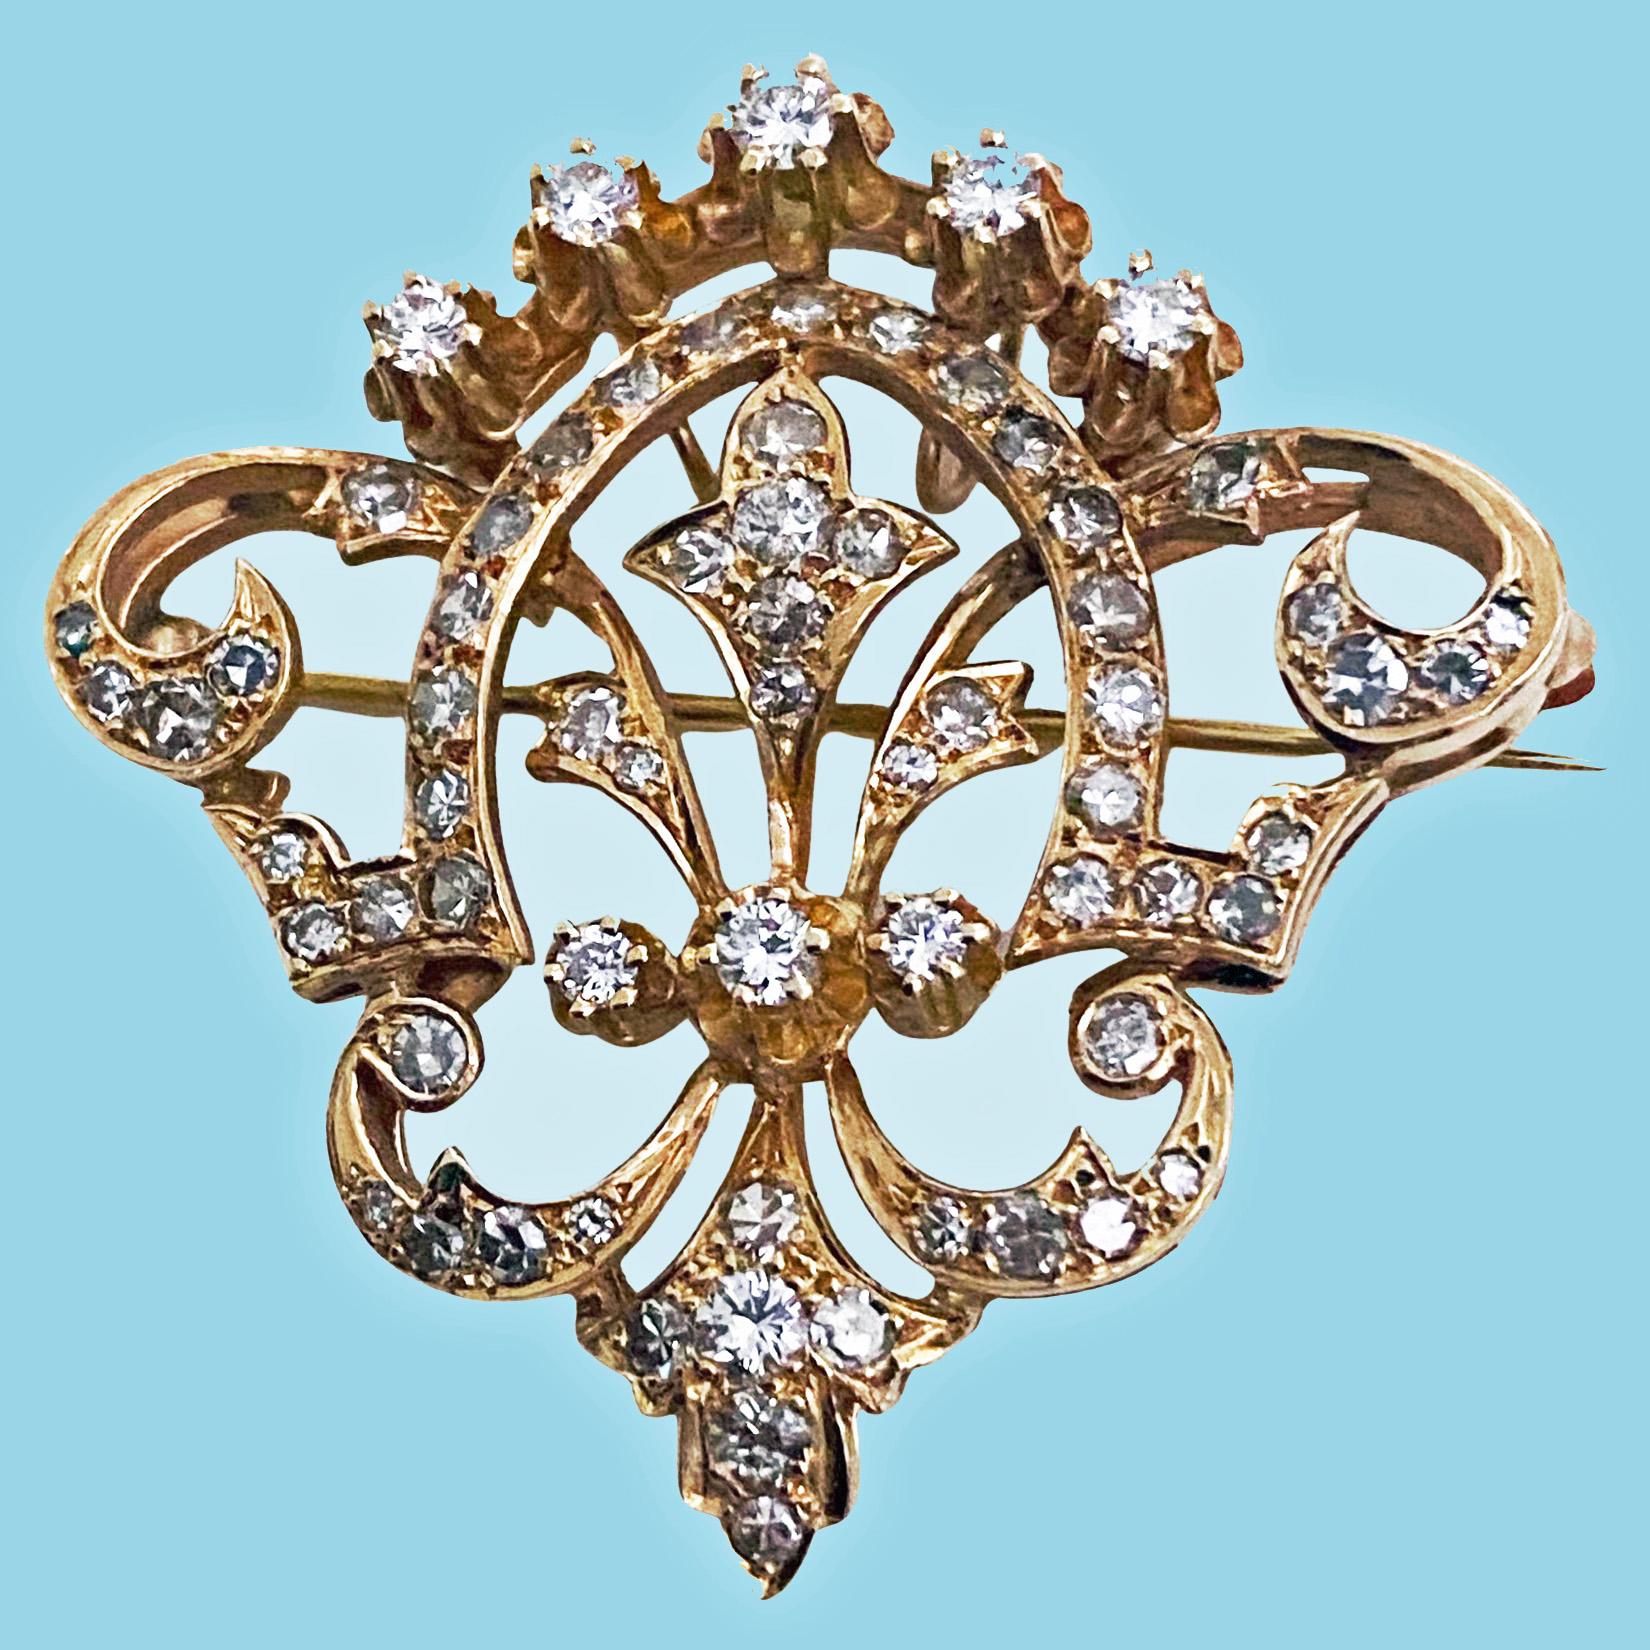 Gold and Diamond Brooch/ Pendant. The Brooch pendant of early 20th century antique style set with 67 mixed round brilliant and single cut Diamonds, approximately 1.90 cts total diamond weight, average SI- I1 clarity, average J colour all mounted in